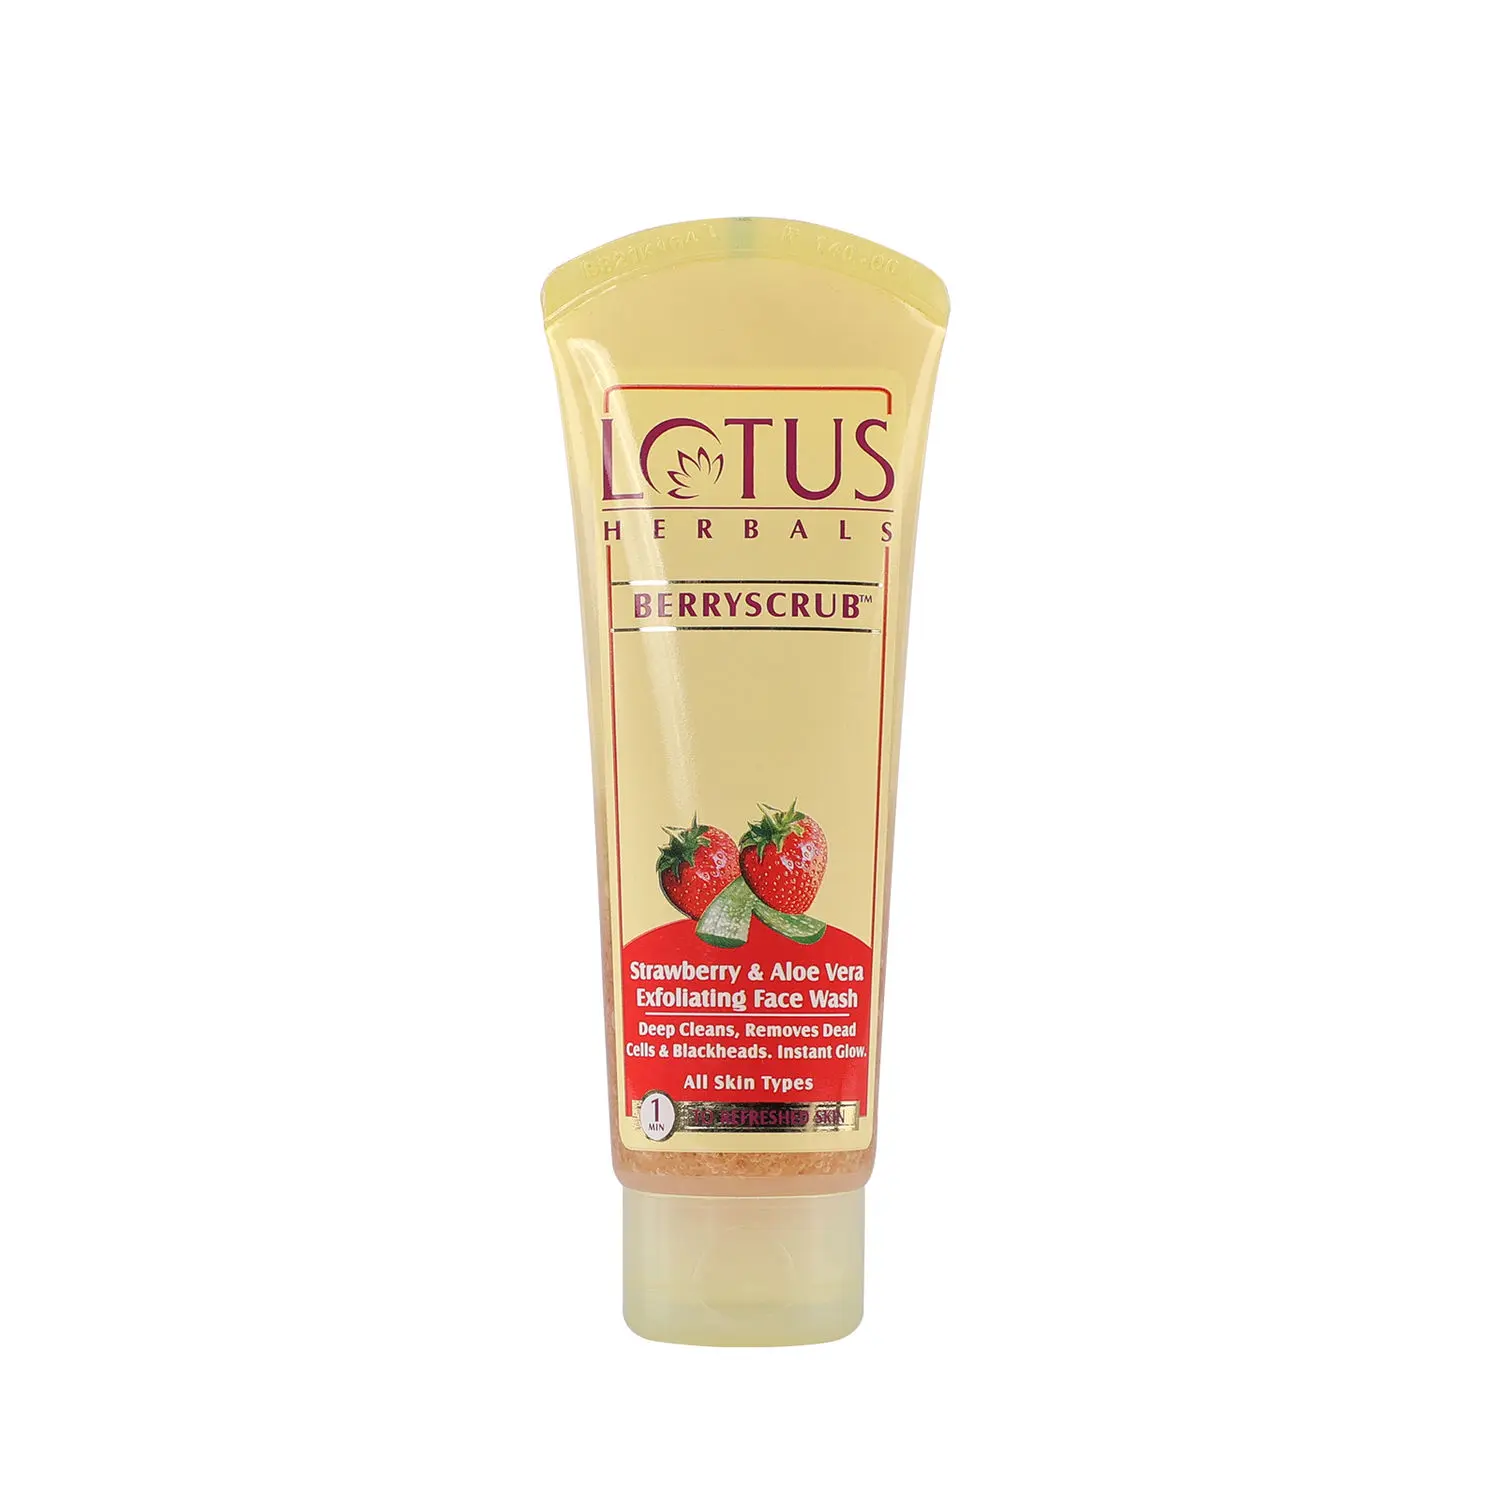 Lotus Herbals Berryscrub Strawberry & Aloe Vera Exfoliating Face Wash | Deep Cleaning | Blackhead Removal | For All Skin Types | 120g